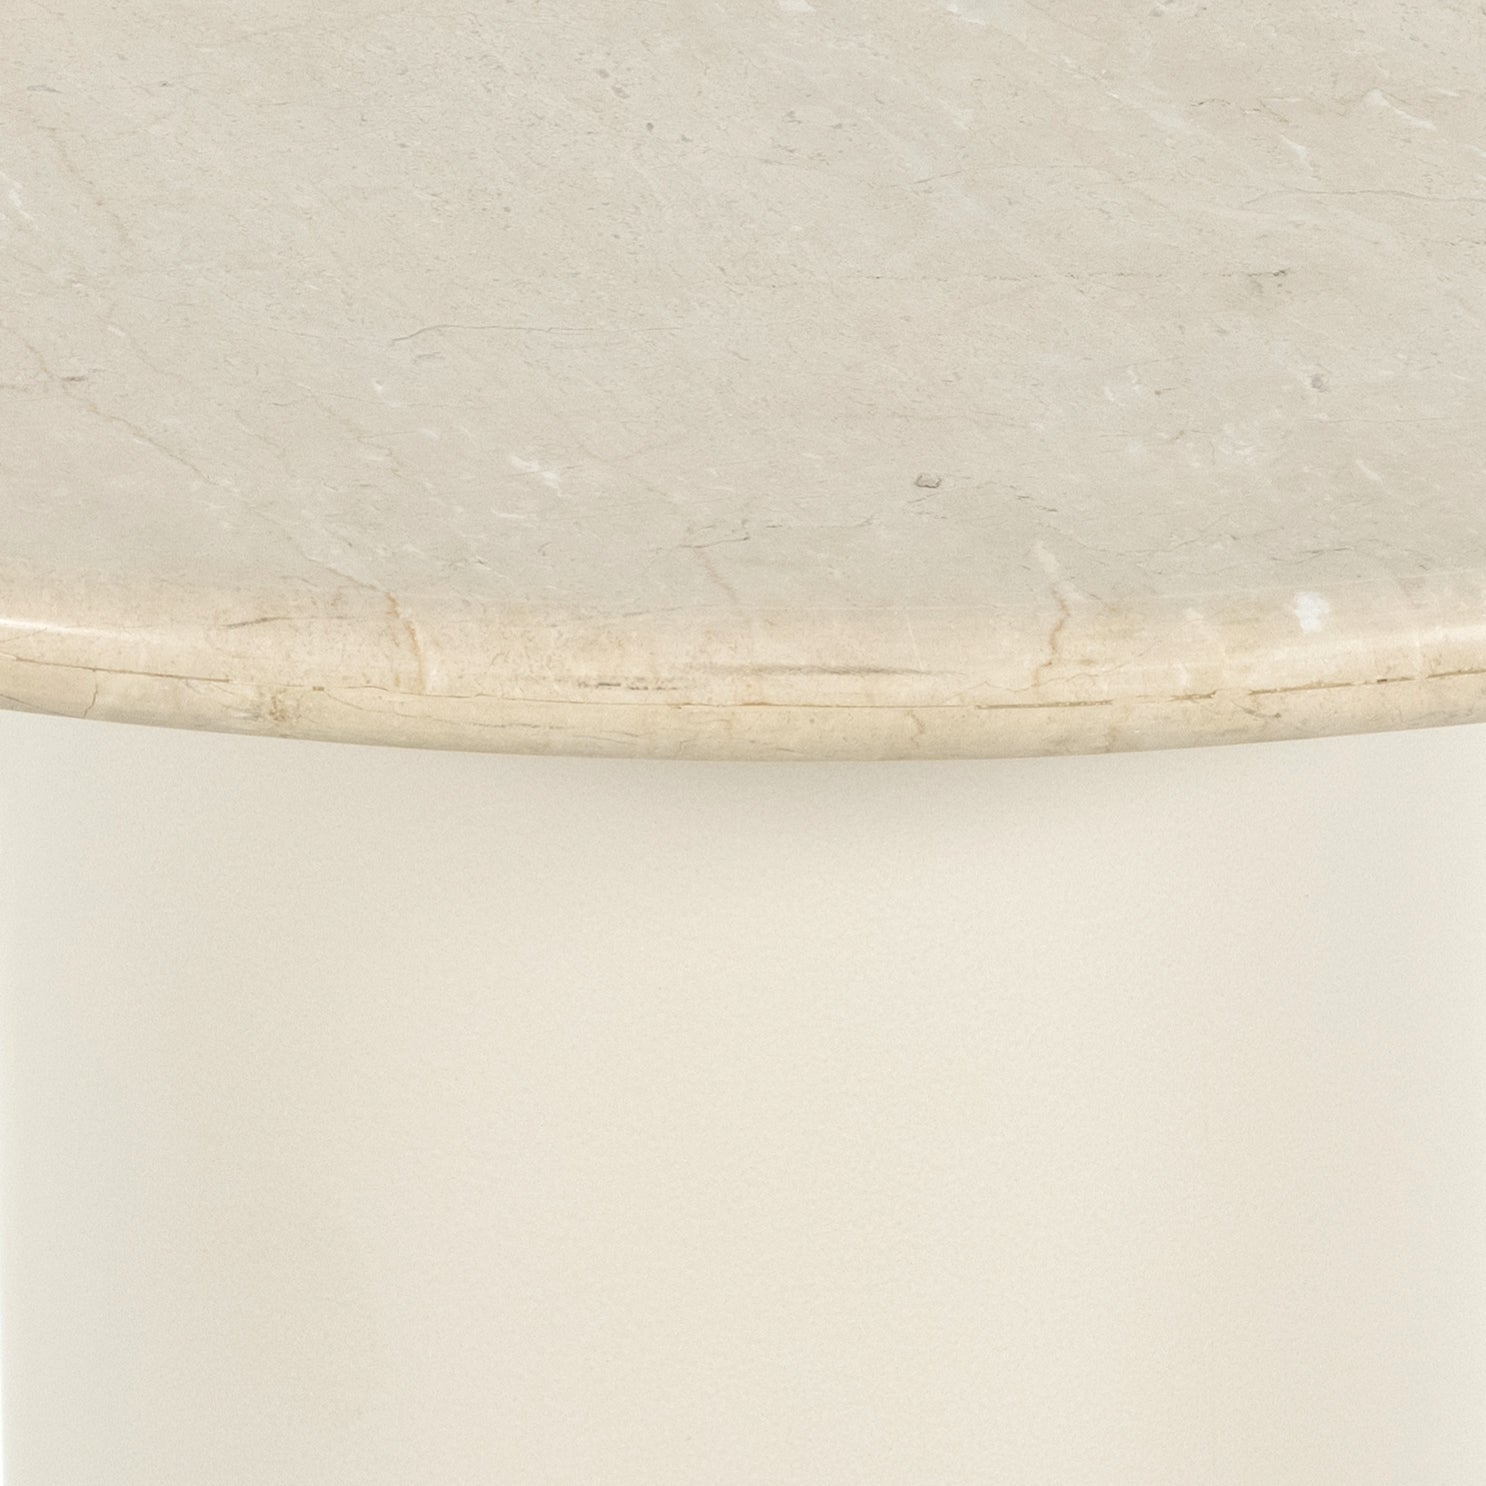 Simply sophisticated with this Belle Round Dining Table - Cream Marble. This bistro-style table inspired by 1970s Italian design features an ivory-finished iron base and supports a rounded tabletop of cream-colored solid marble for a fresh, monochromatic look that pairs with just about anything.  Overall Dimensions: 38.00"w x 38.00"d x 30.00"h